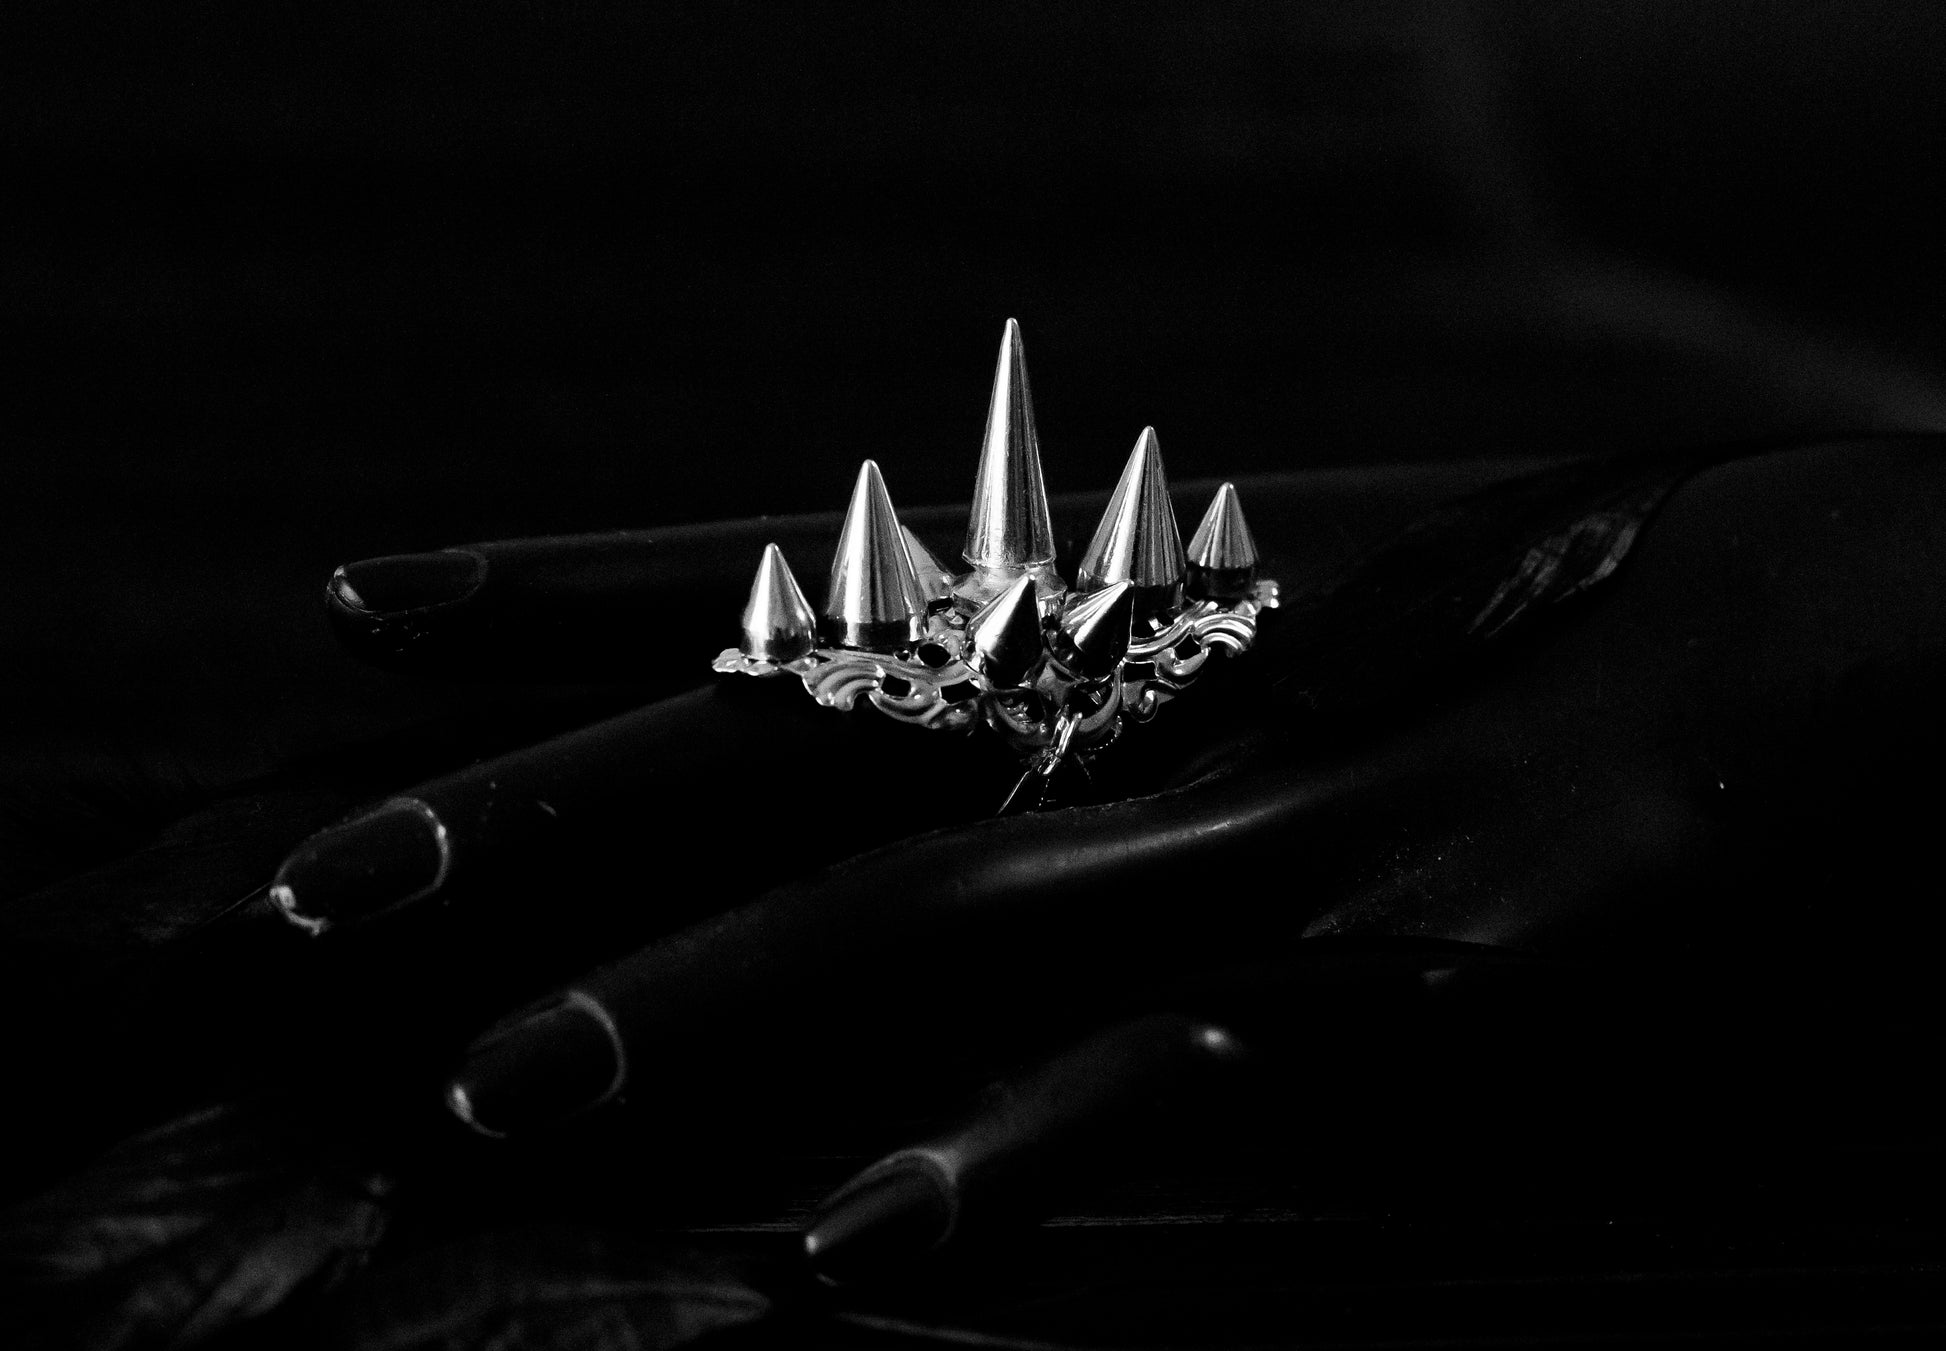 Myril Jewels' punk studded ring is a bold statement piece, meticulously crafted with a fierce array of silver spikes rising in a crown-like silhouette. This ring is a quintessential emblem of Neo Gothic style, designed for those who embody the gothic-chic lifestyle. Ideal for Halloween, it's a standout accessory for everyday wear by those who favor the Witchcore aesthetic, and a must-have for any minimal goth or Whimsigoth-inspired collection